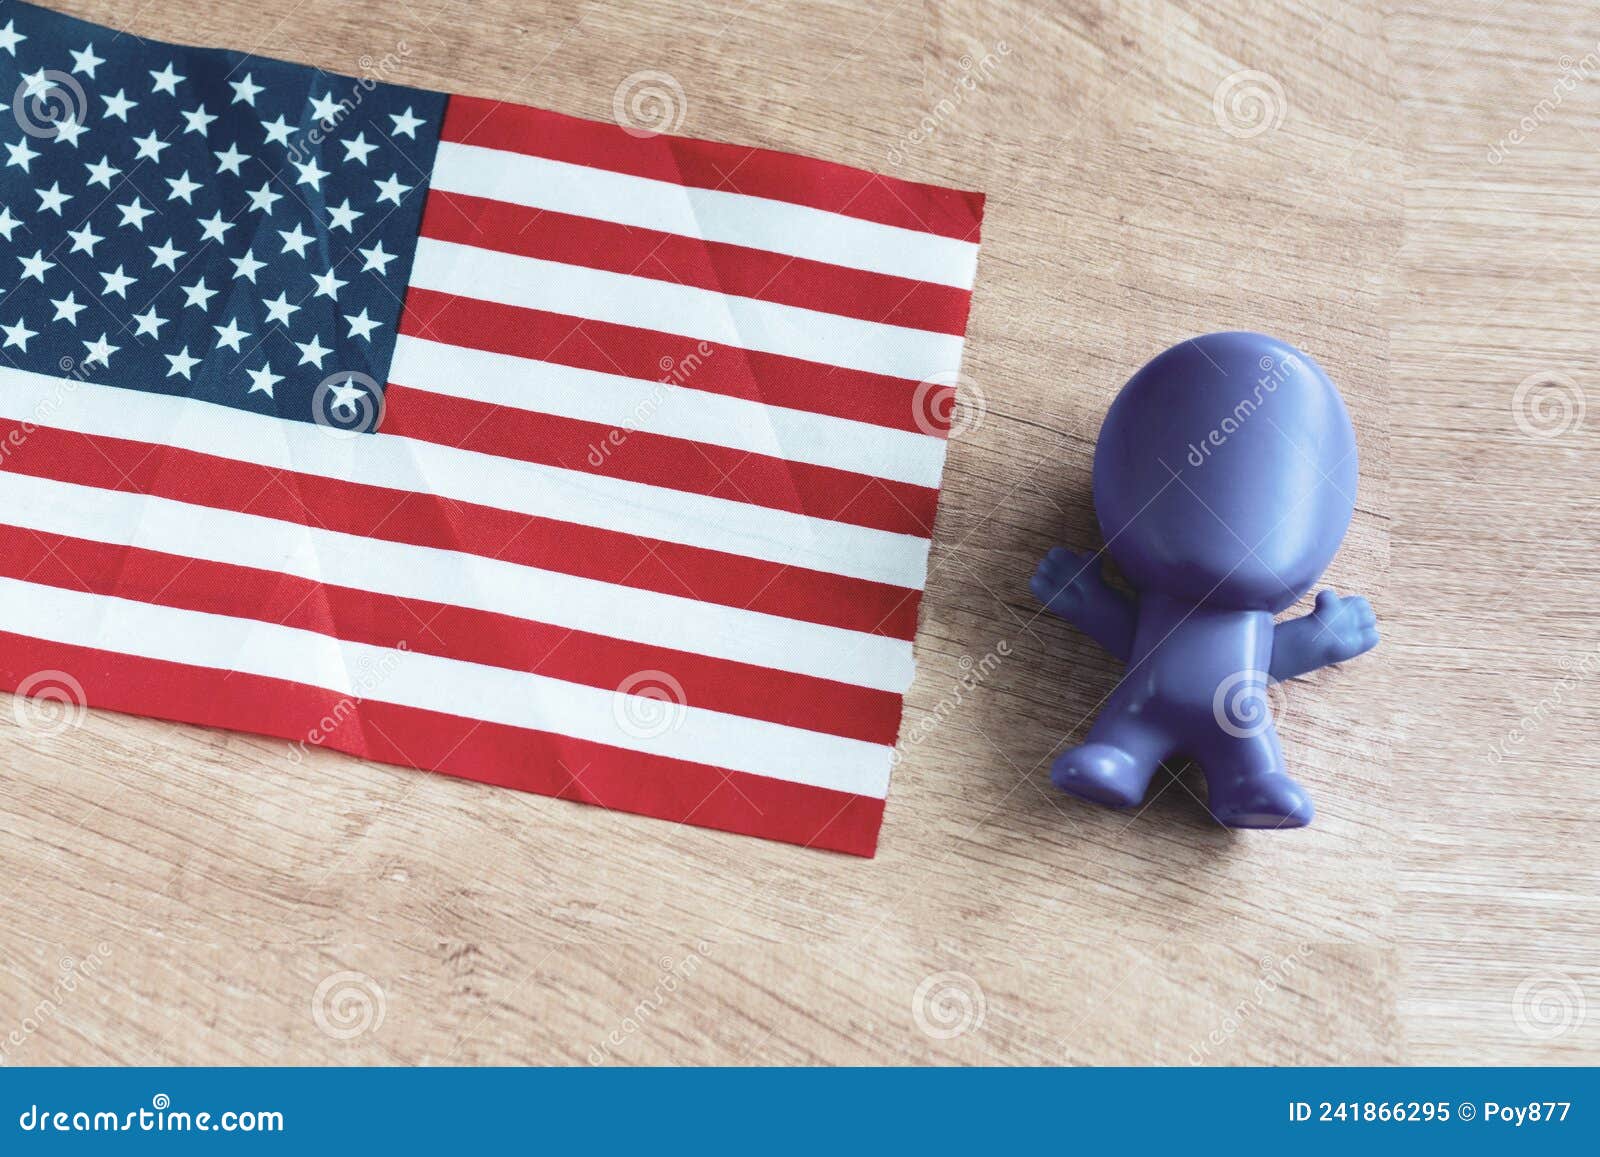 person figurine. man with usa flag